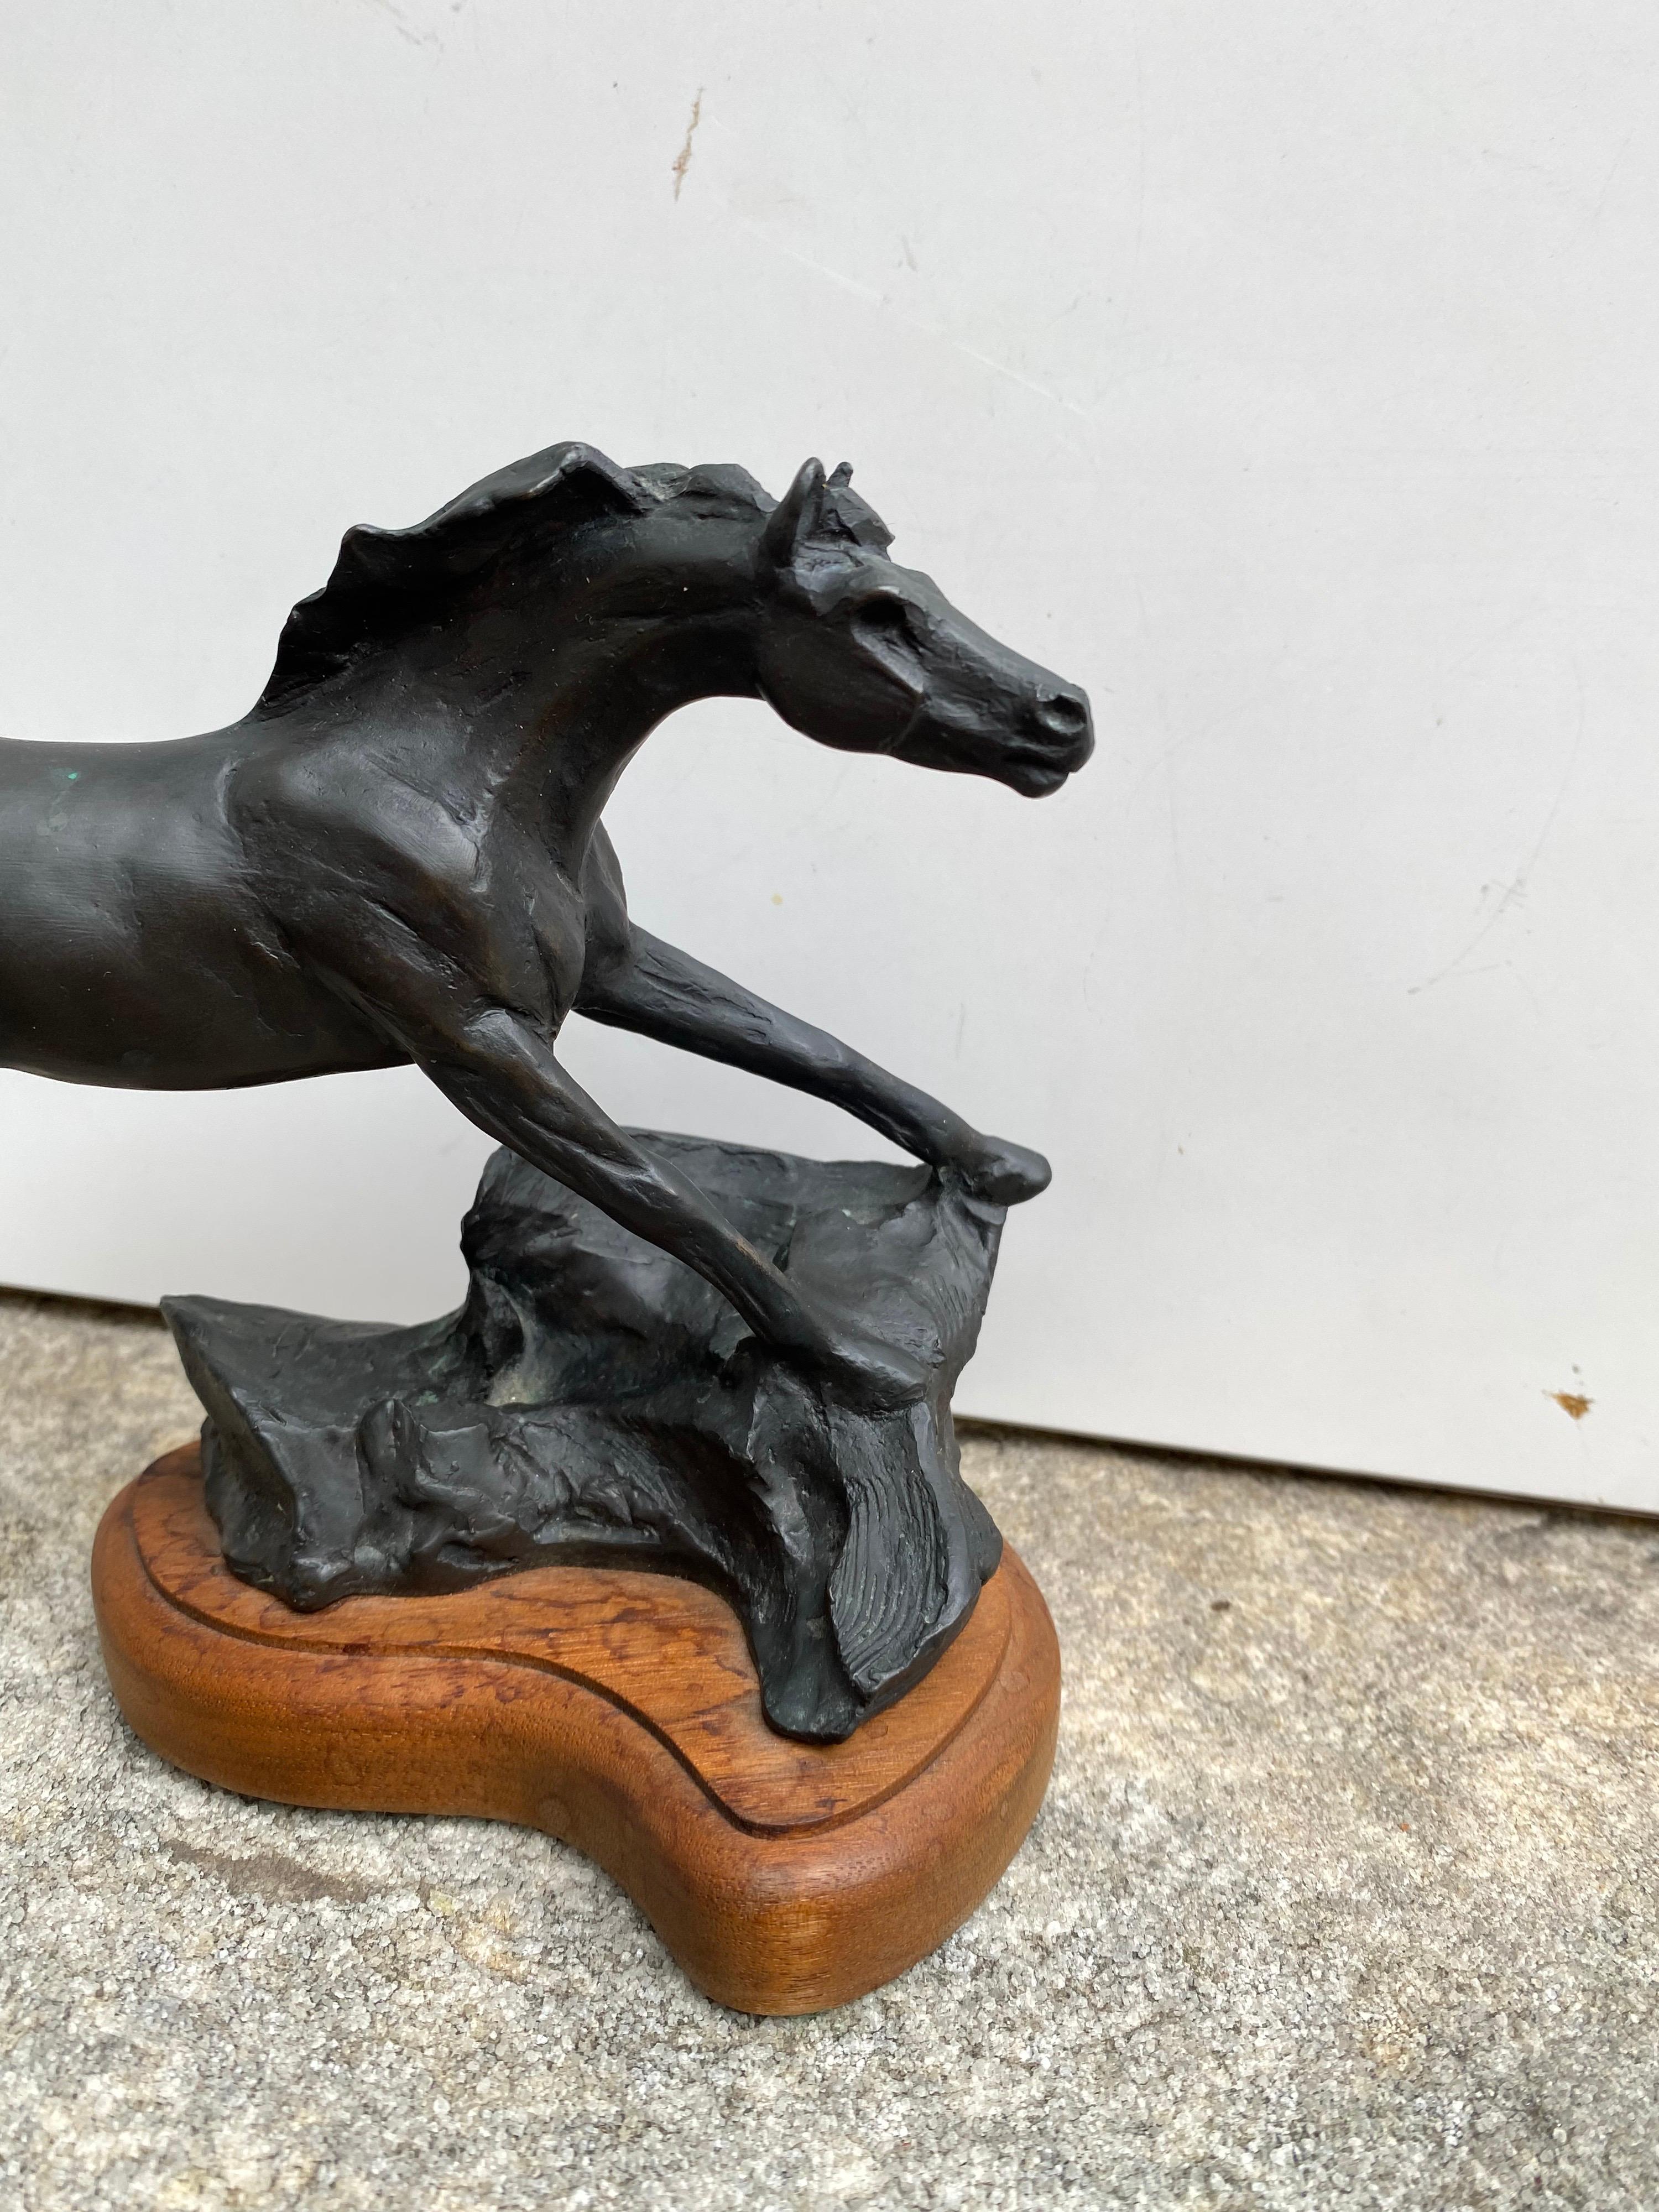 Veryl Goodnight bronze Horse dated 1989. Horse is mounted on a wood base. Known for her Western and Animal Subject matter.